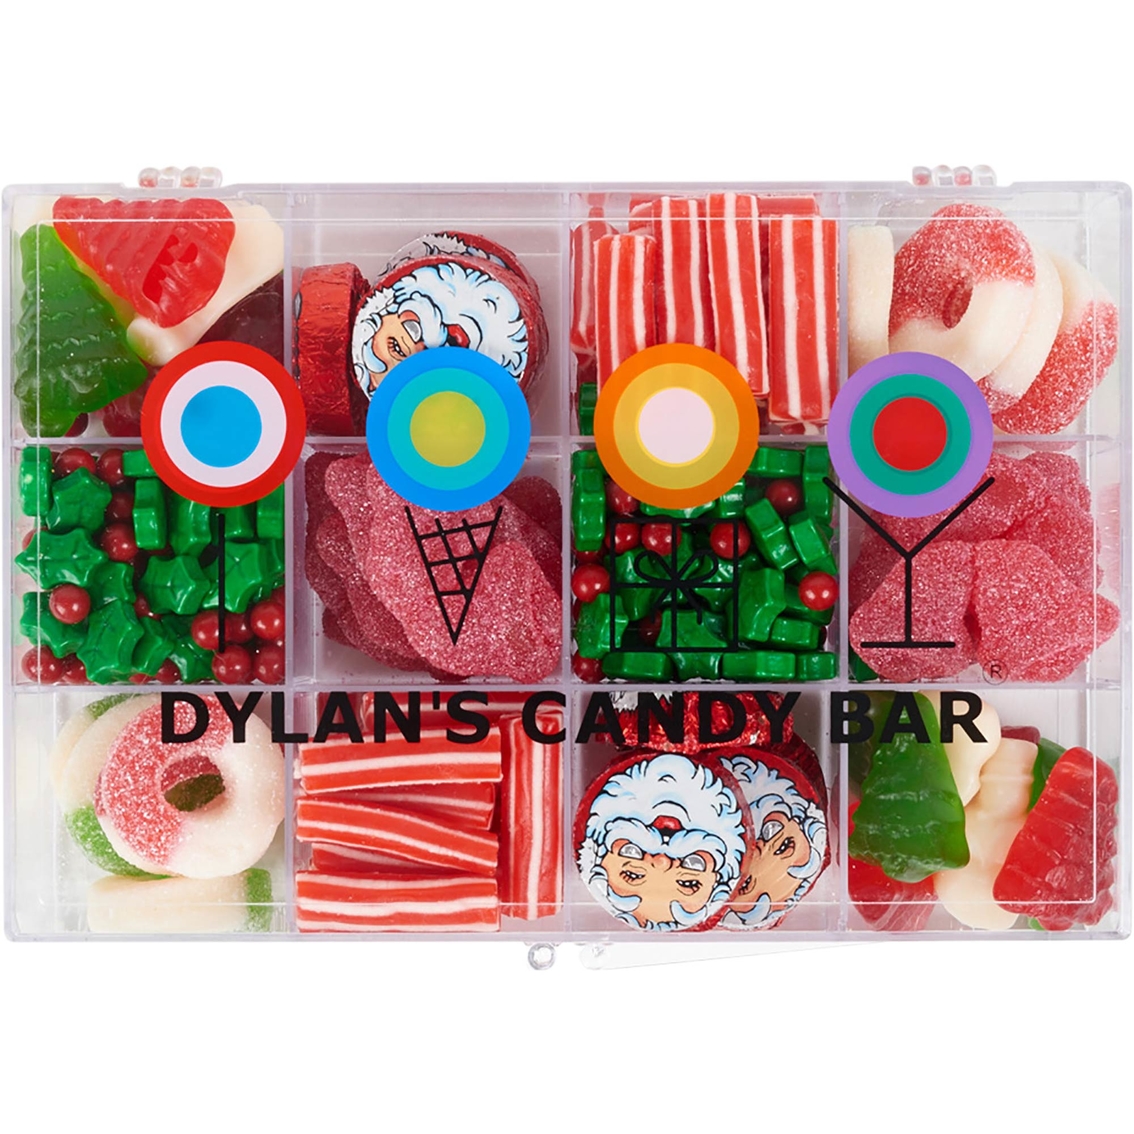 Dylan's Candy Bar Christmas Tackle Box, Candy & Chocolate, Food & Gifts